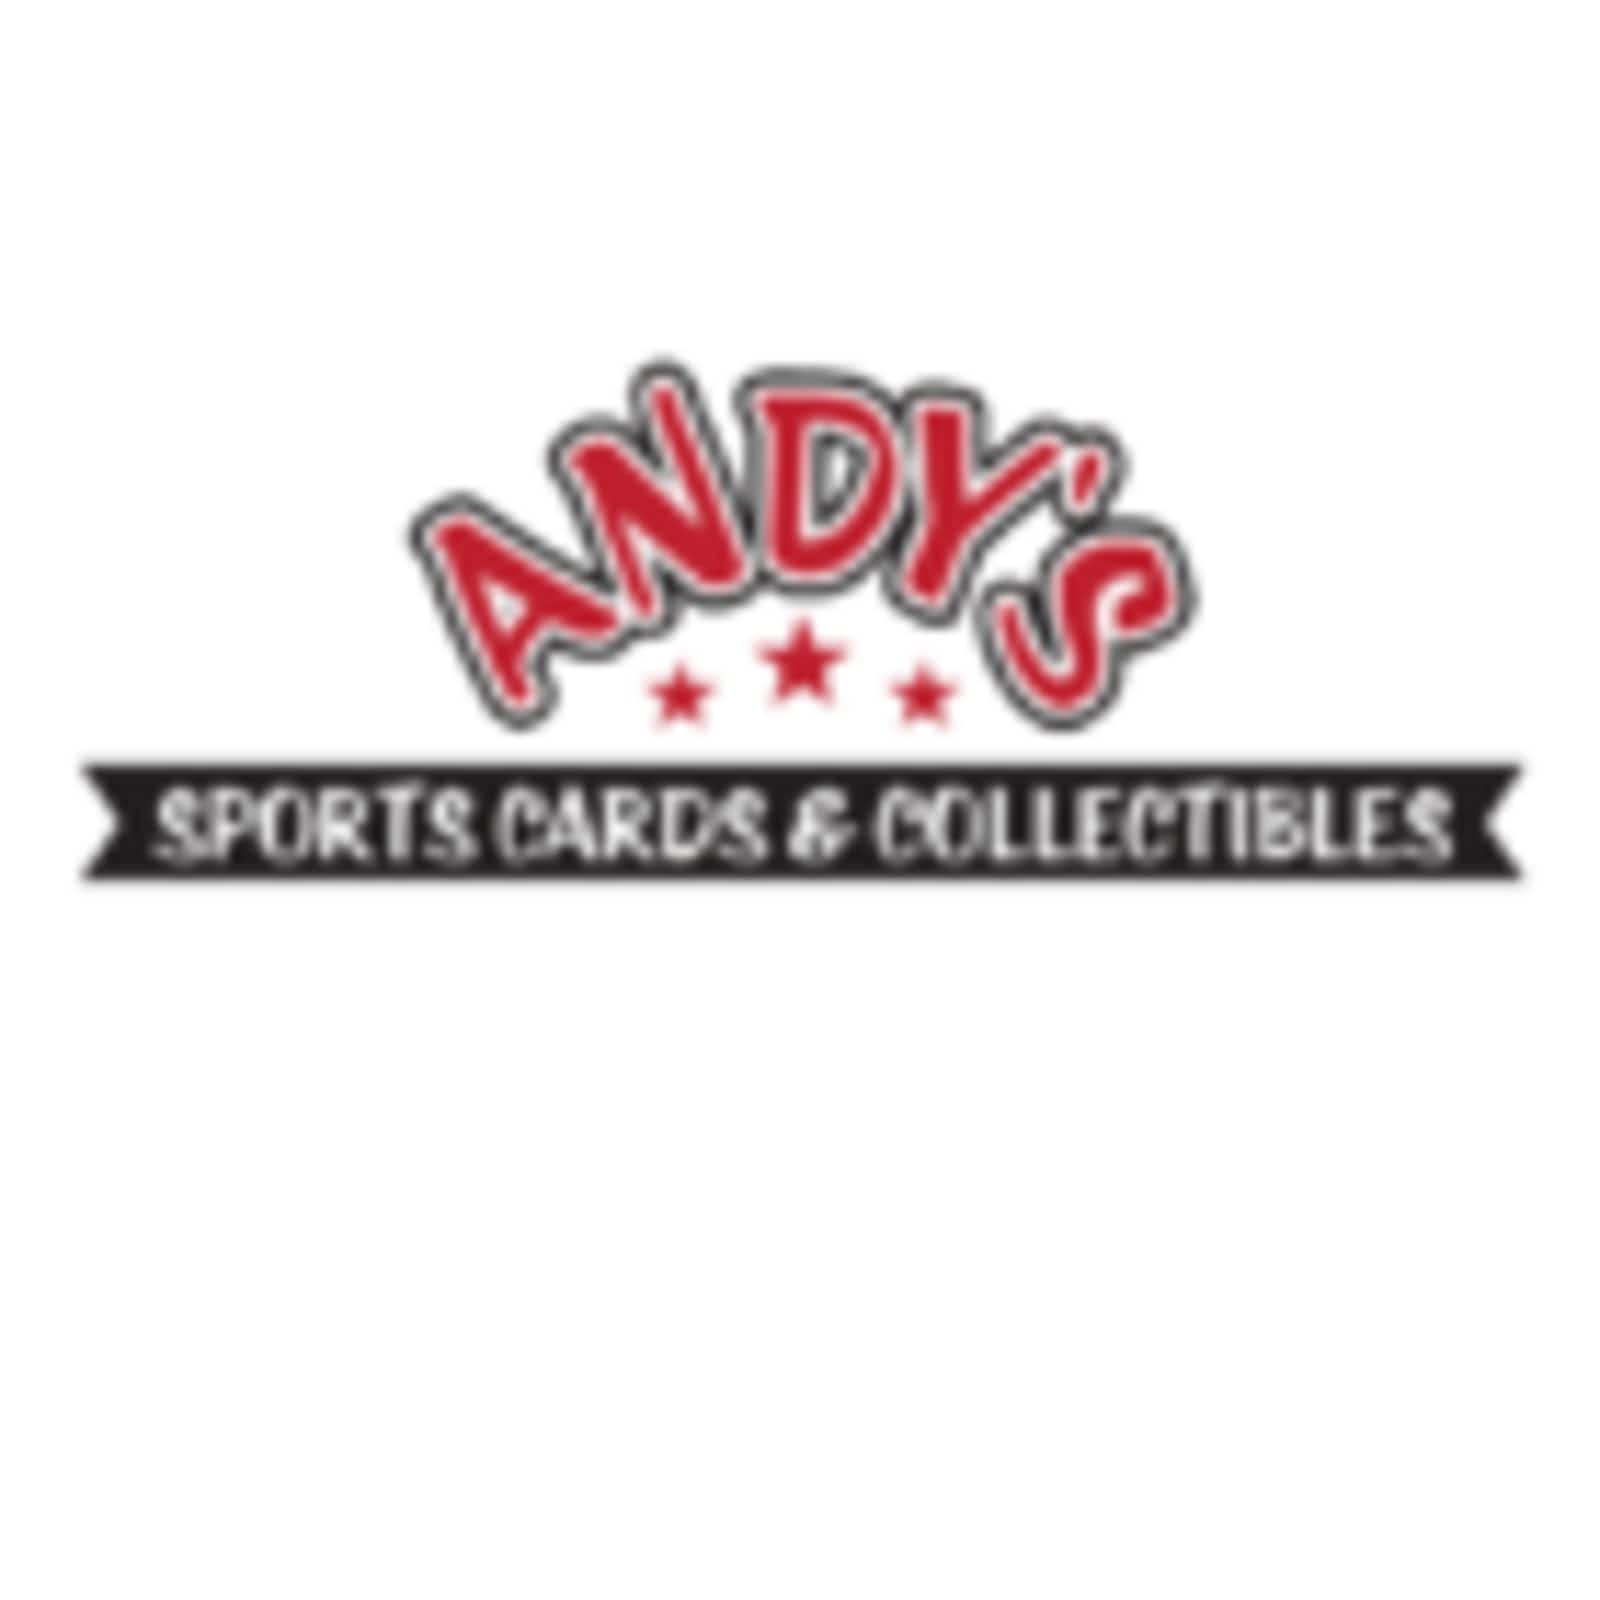 Andy's Sports Cards \u0026 Collectibles Ltd 